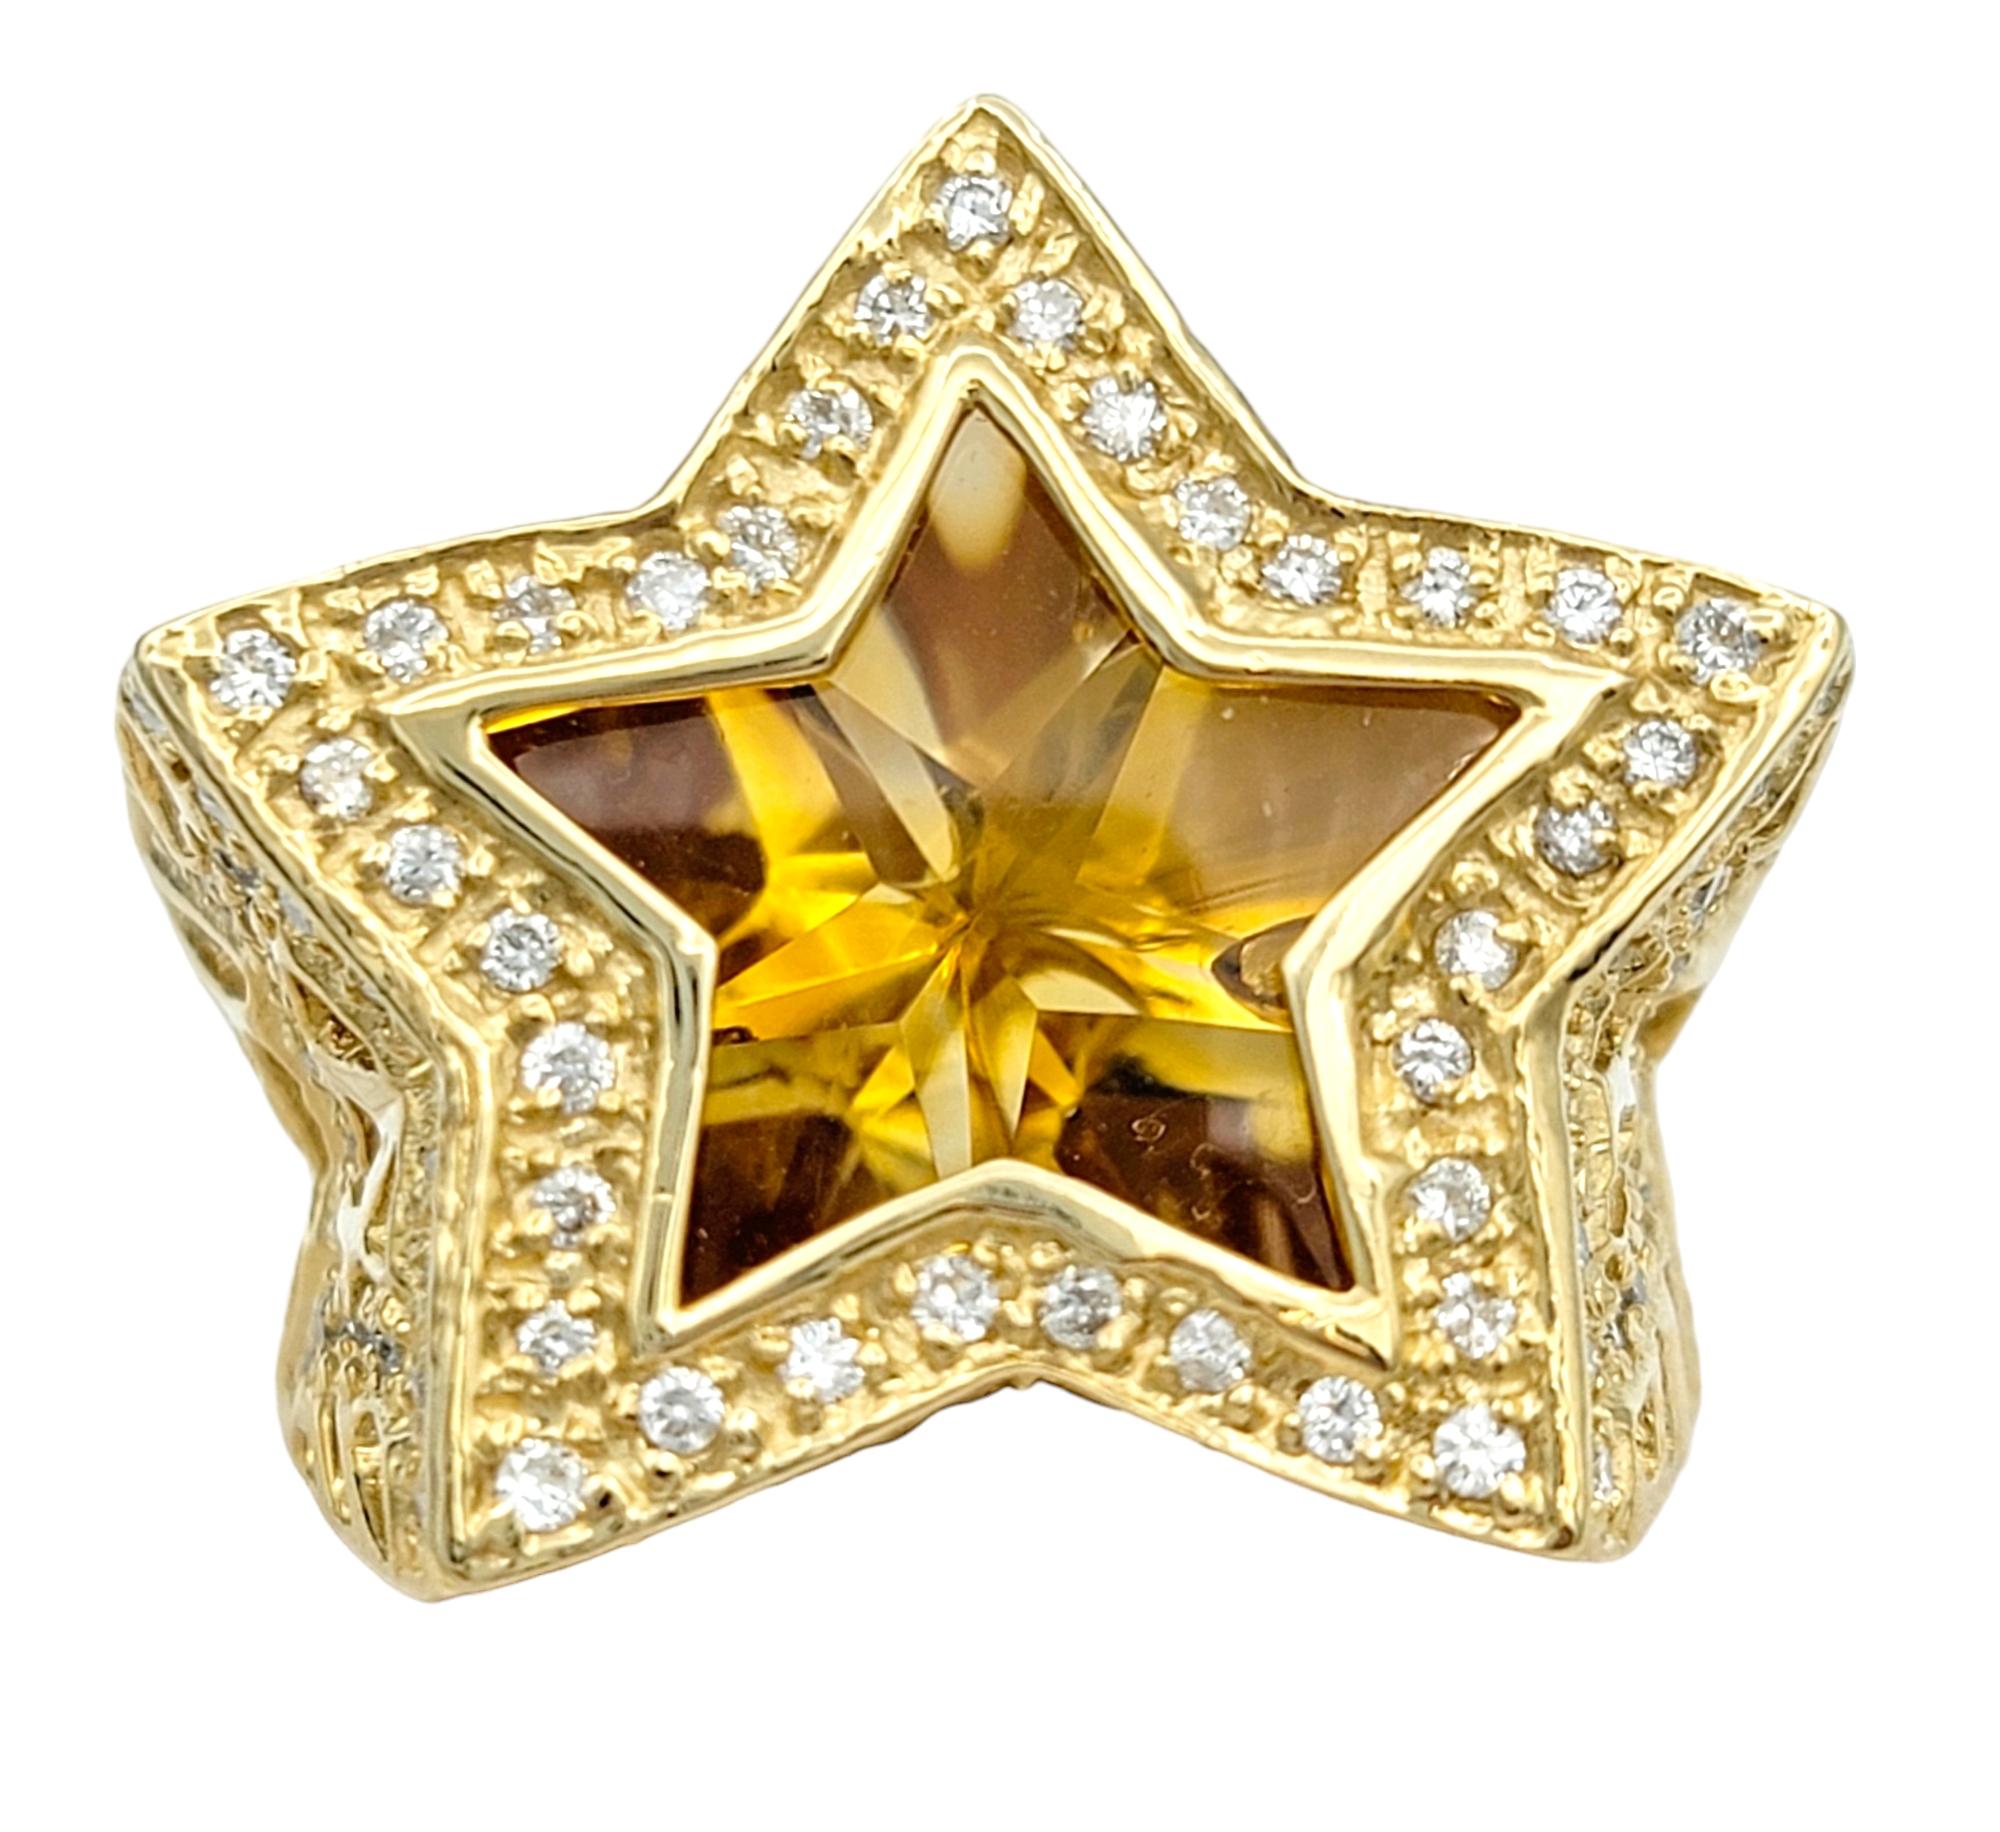 Ring size: 6.75

This incredible cocktail ring by Sonia B. Designs will not go unnoticed! This eye-catching piece features a chunky, wide star-shaped design that will make you shine like a star. Made from 14 karat yellow gold, this ring exudes